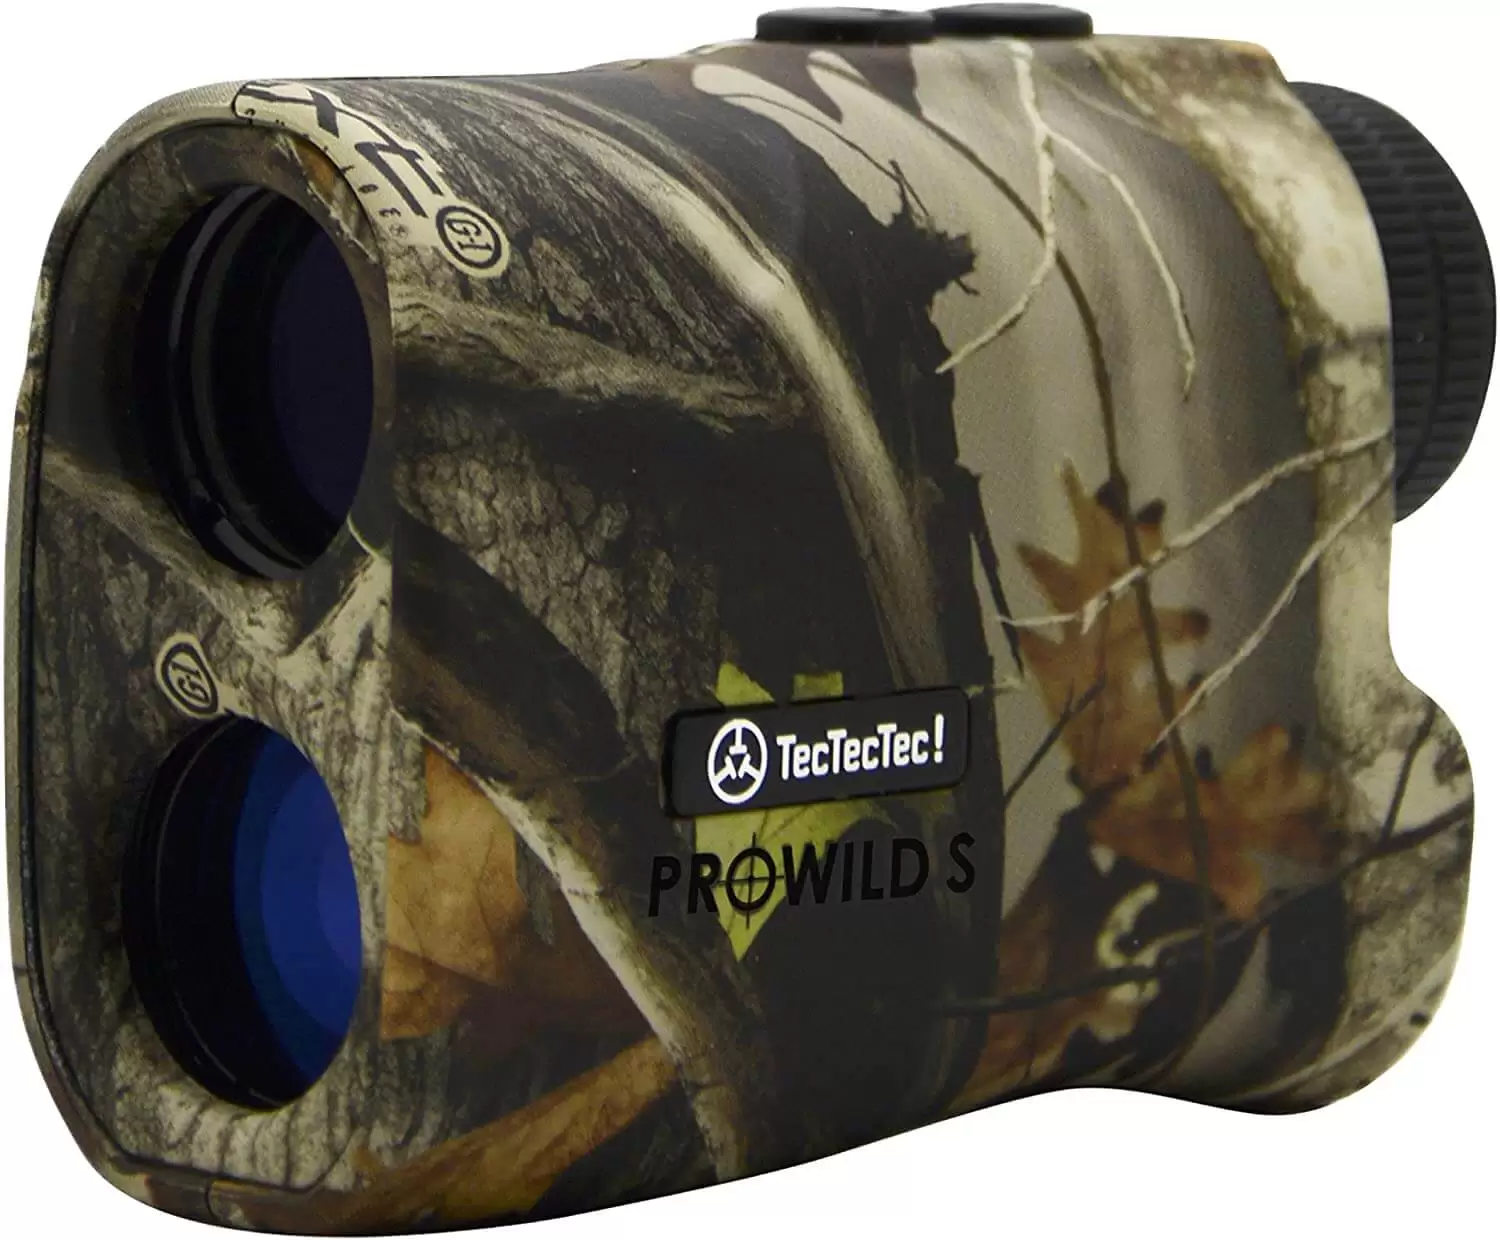 TecTecTec ProWild Hunting Rangefinders with Angle Compensation